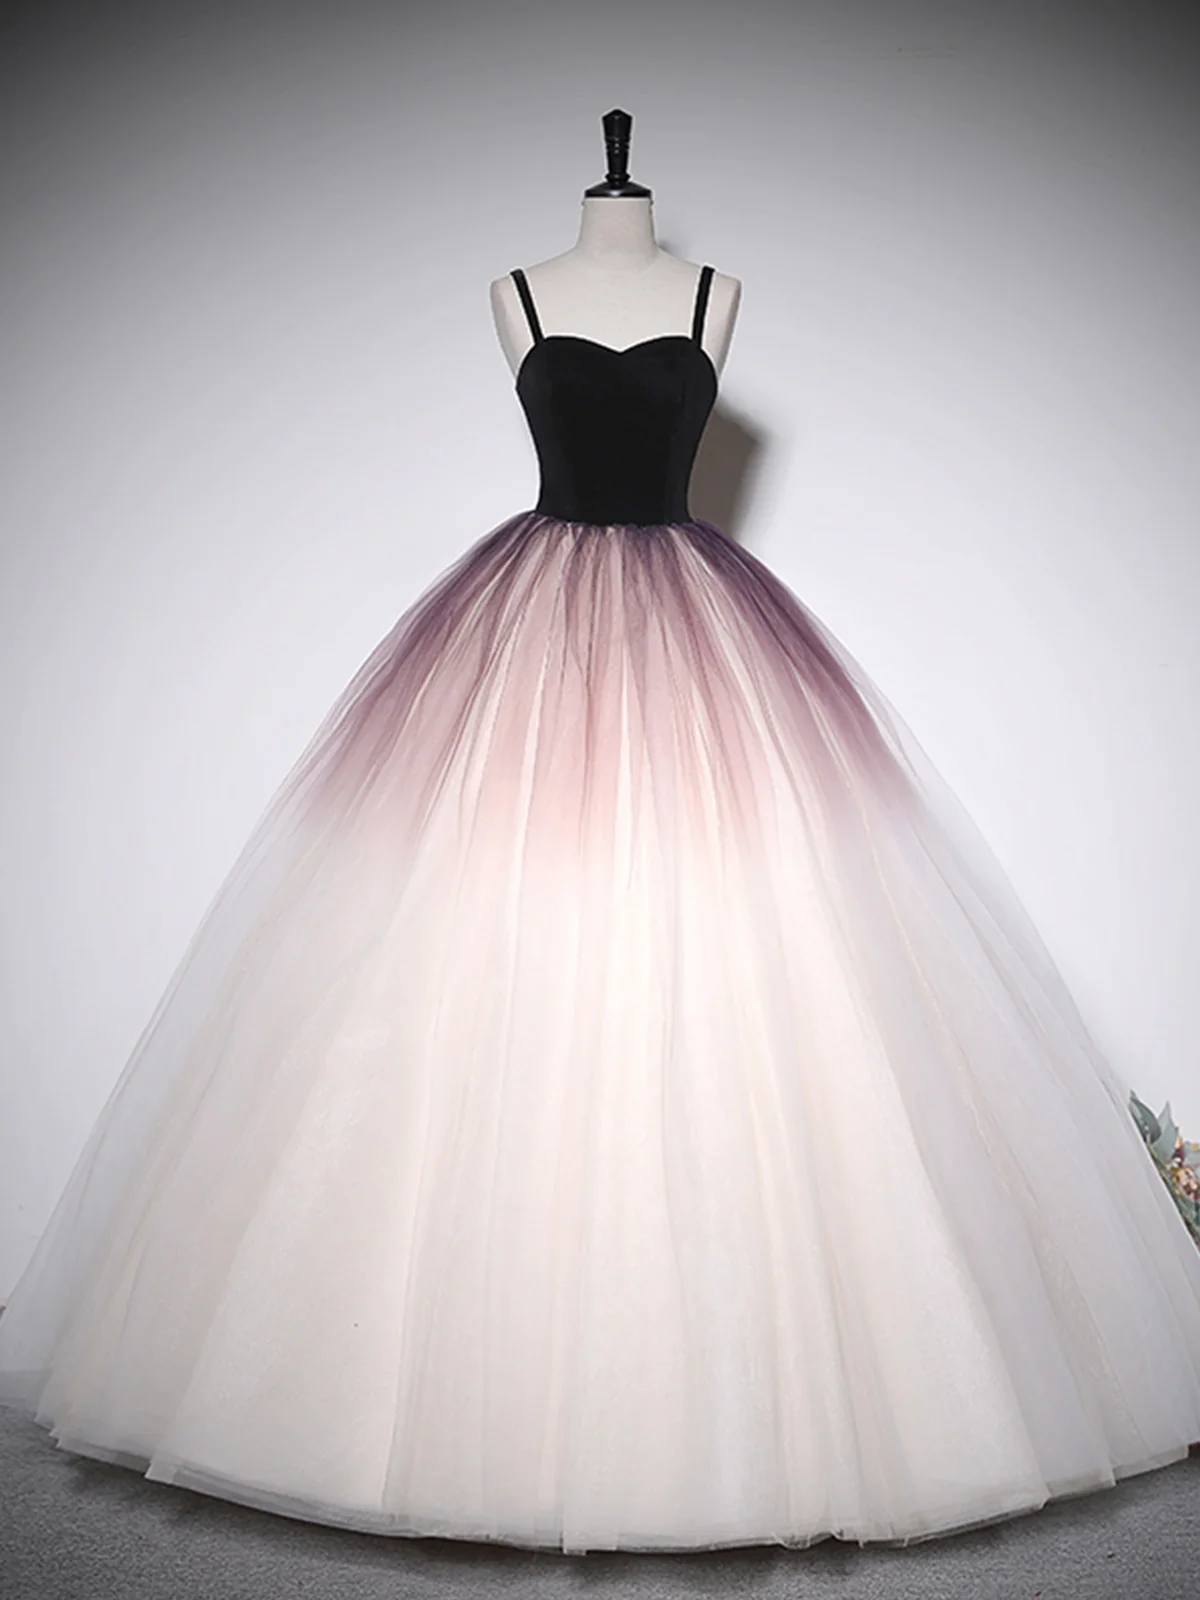 Midnight Velvet And Ombre Tulle Ball Gown